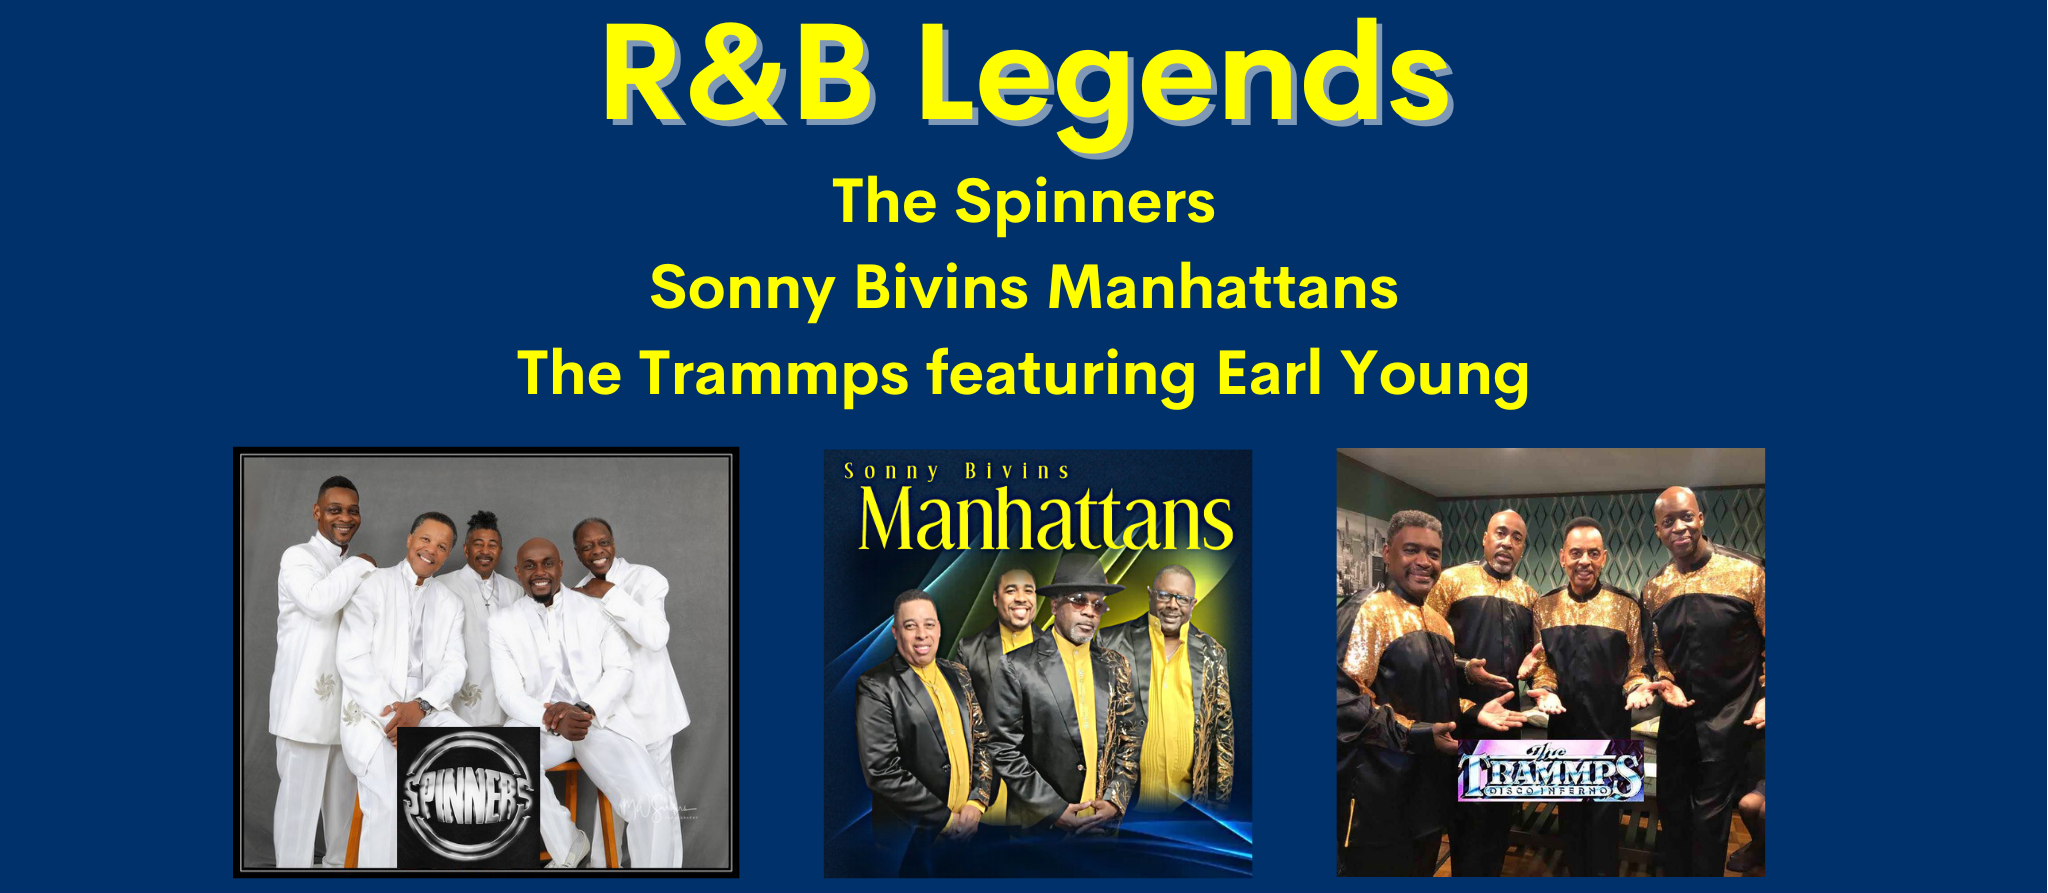 The Spinners, The Manhattans & The Trammps at Barbara B Mann Performing Arts Hall